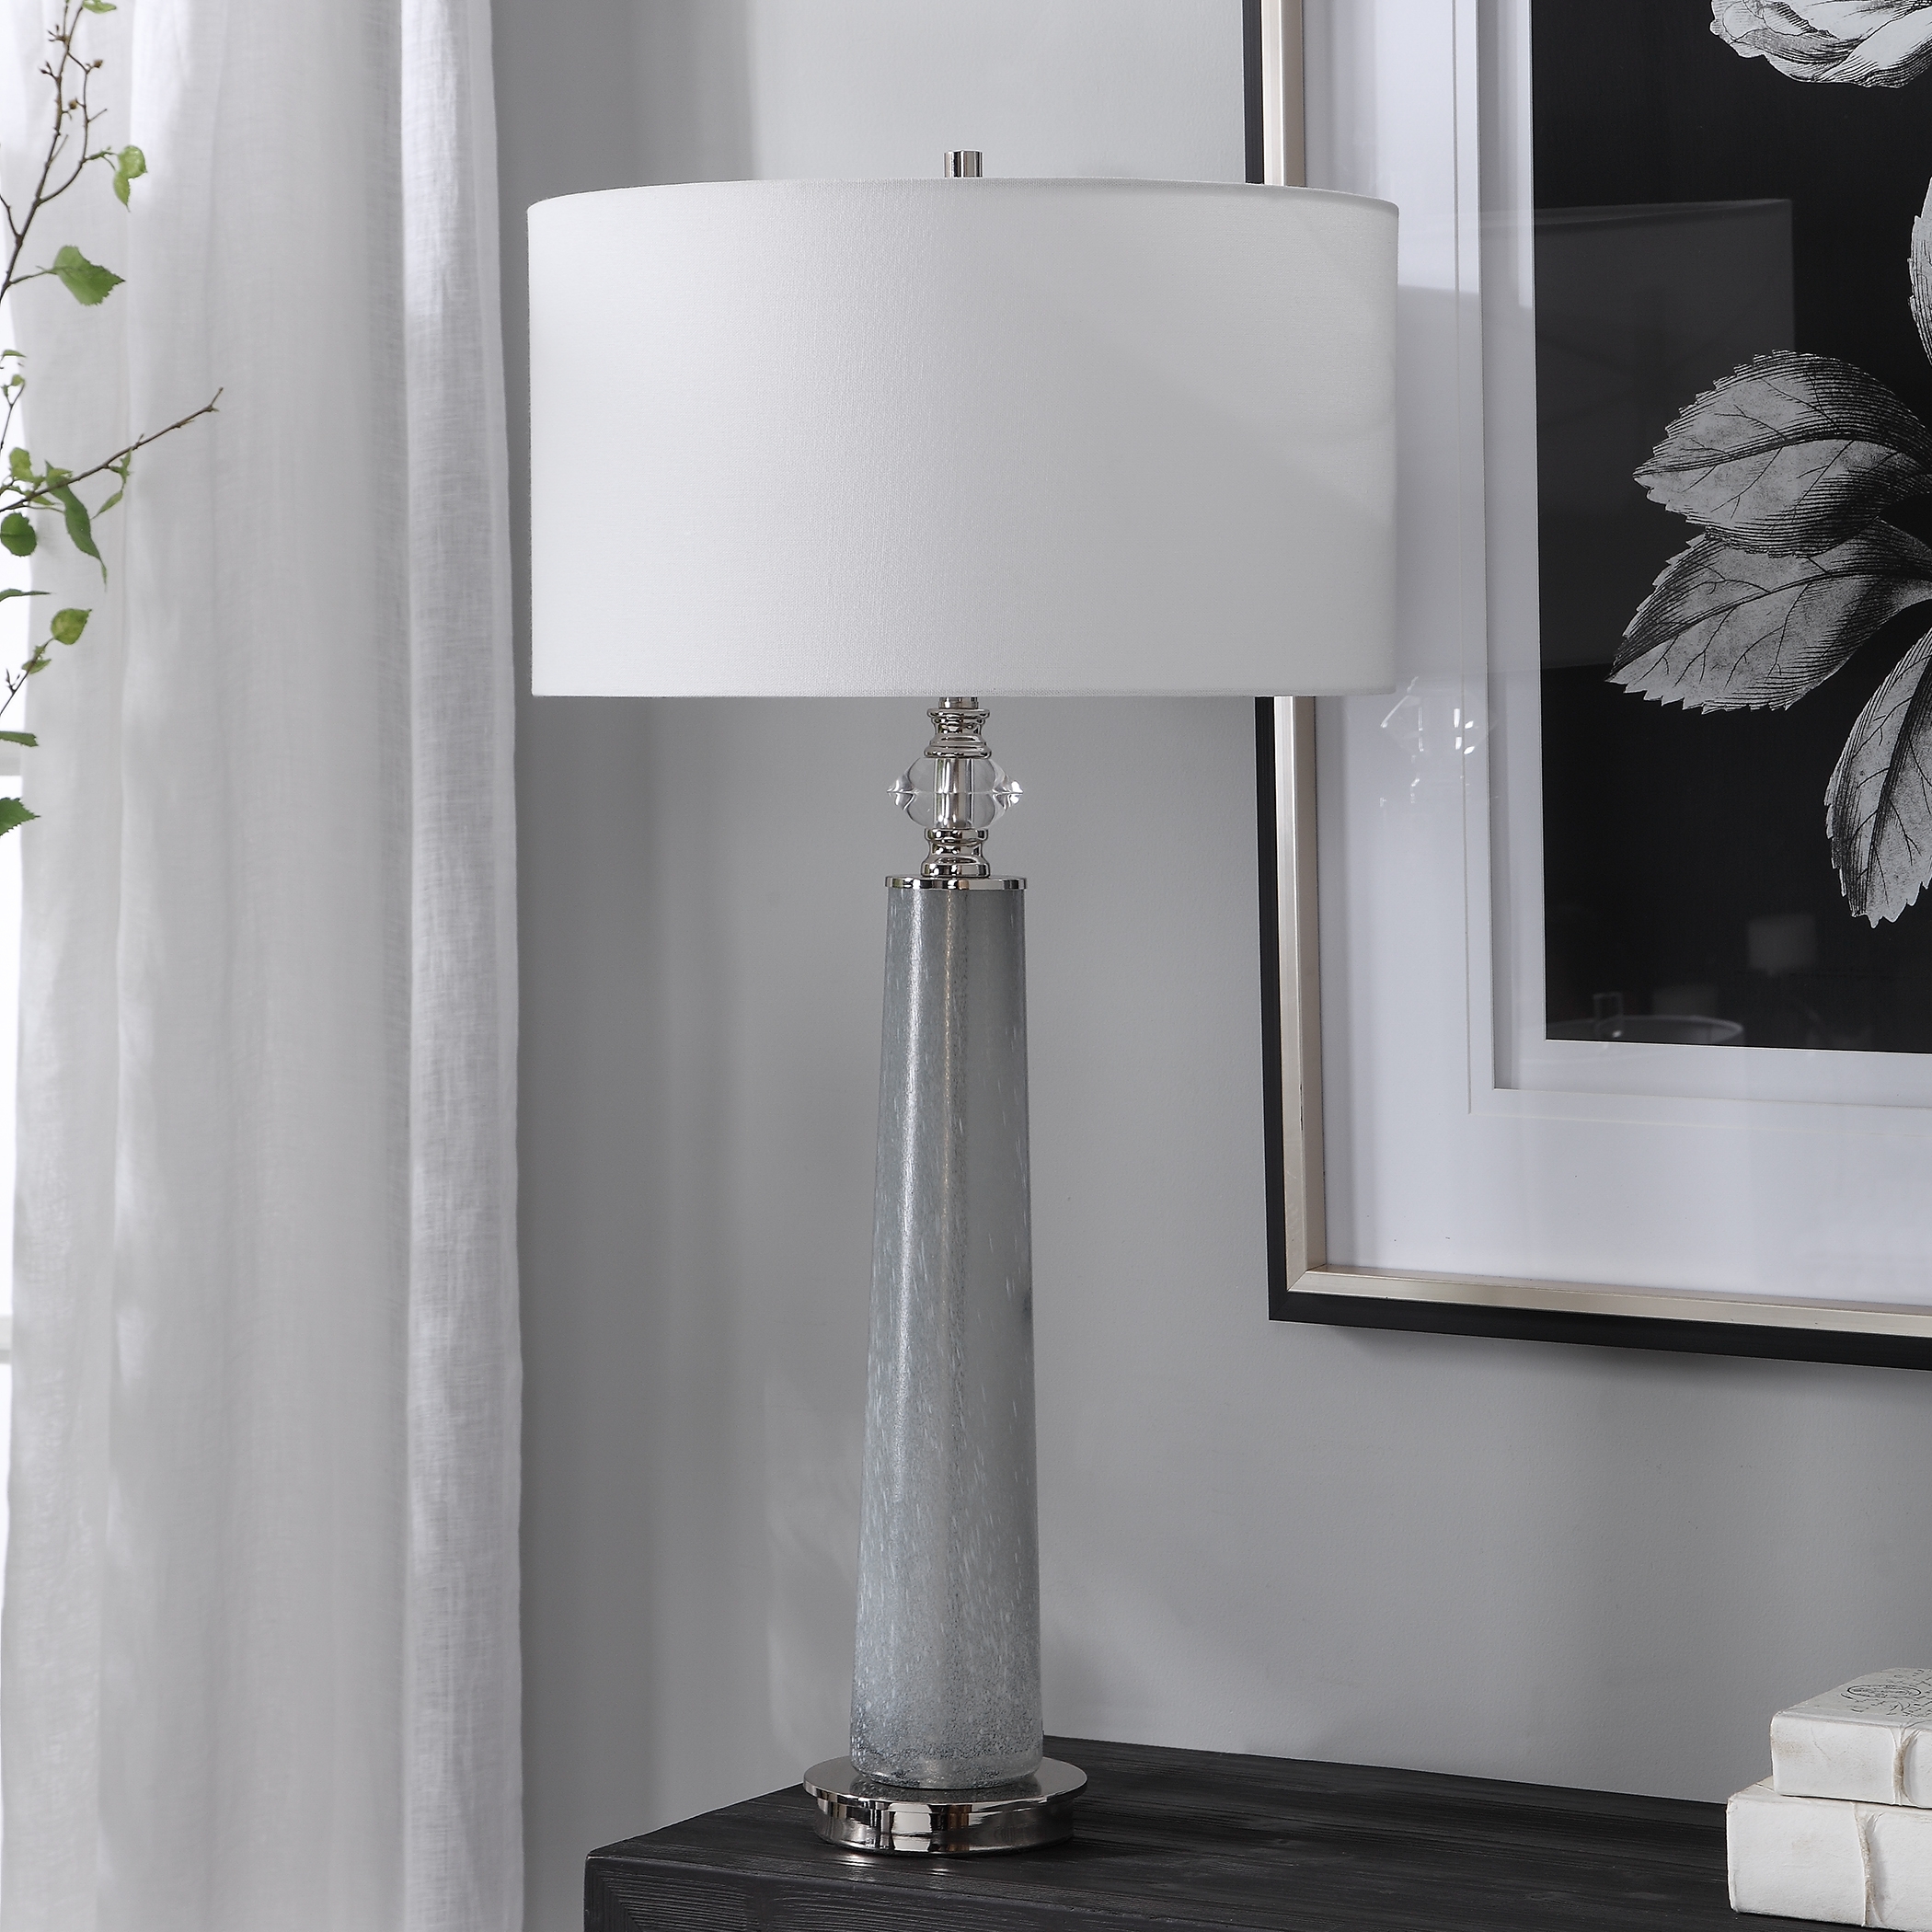 Grayton Frosted Art Table Lamp - Image 4